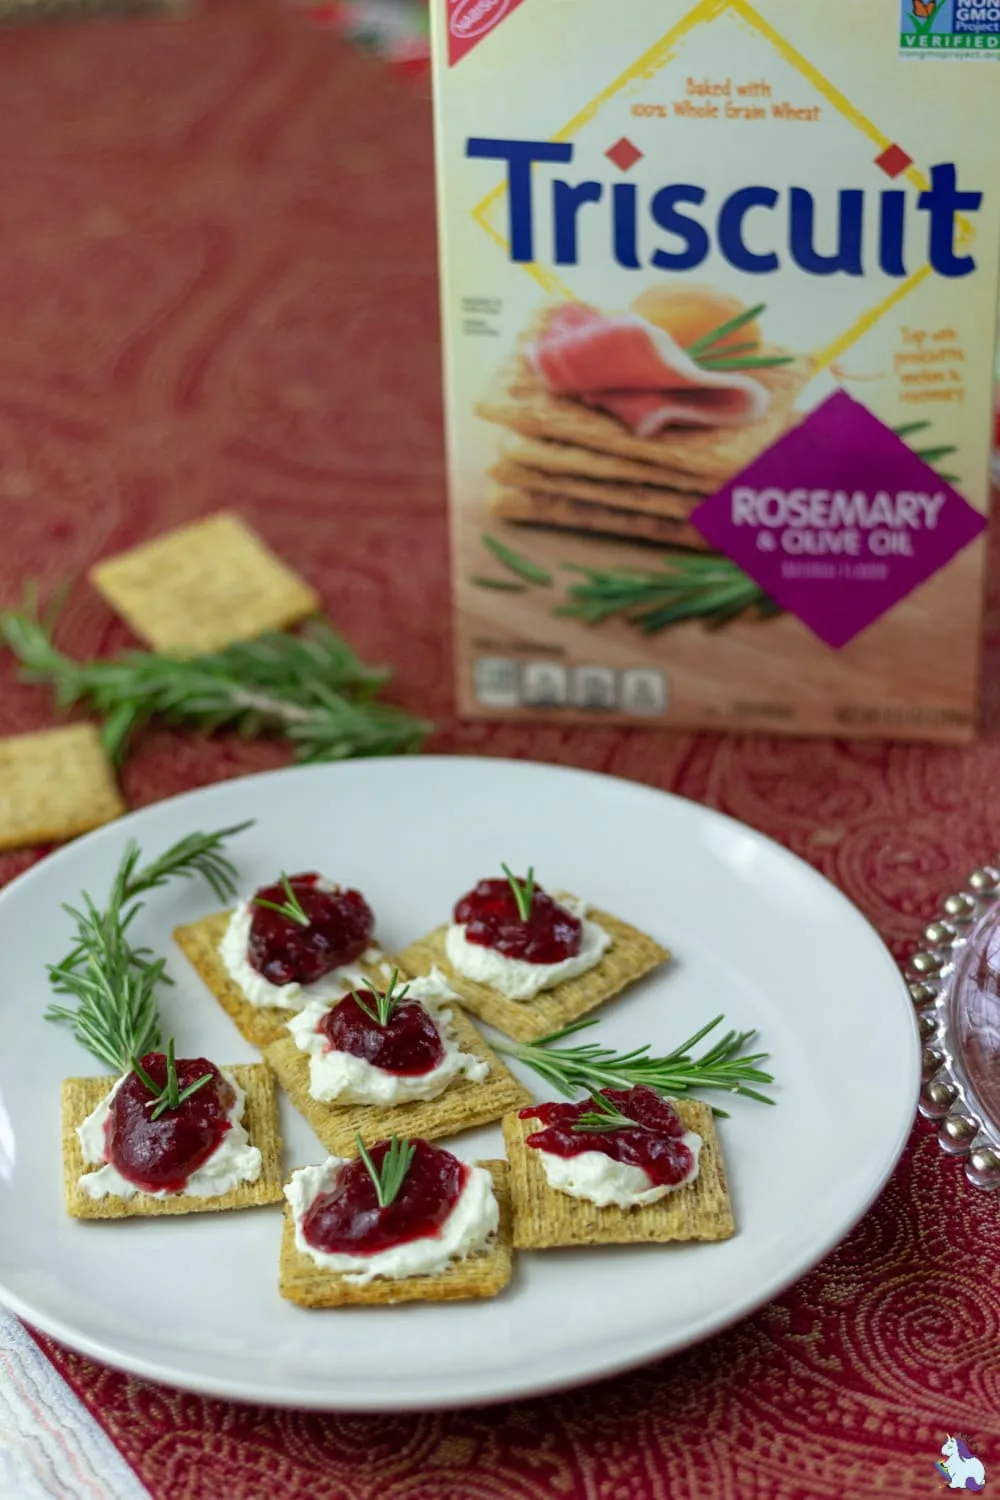 Triscuits with cranberry jam topping on a plate with a box of Triscuits